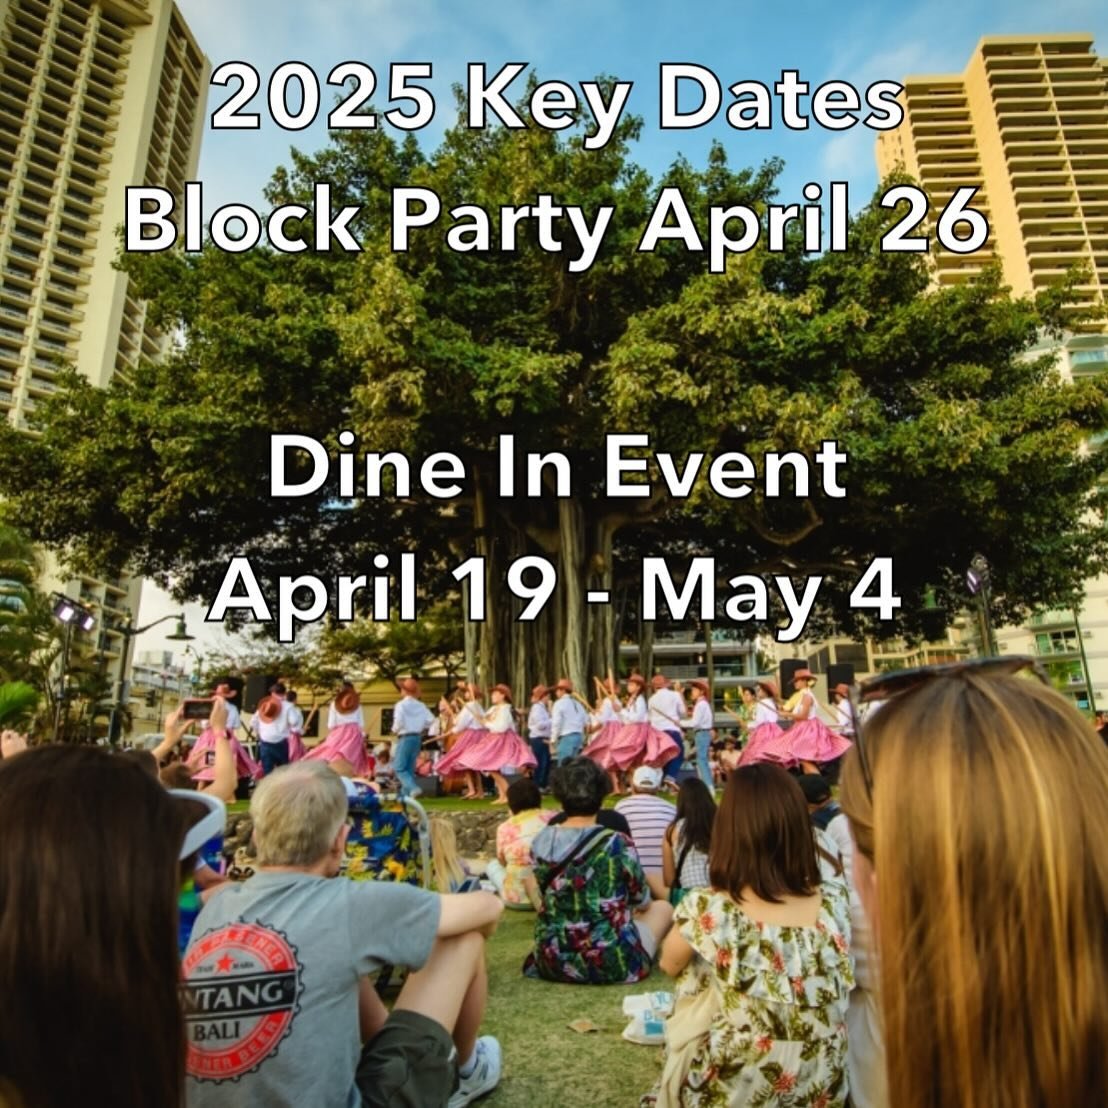 Key event dates for 2025!

Interested in being a vendor? Do not message us here. Please visit https://www.spamjamhawaii.com/contact.